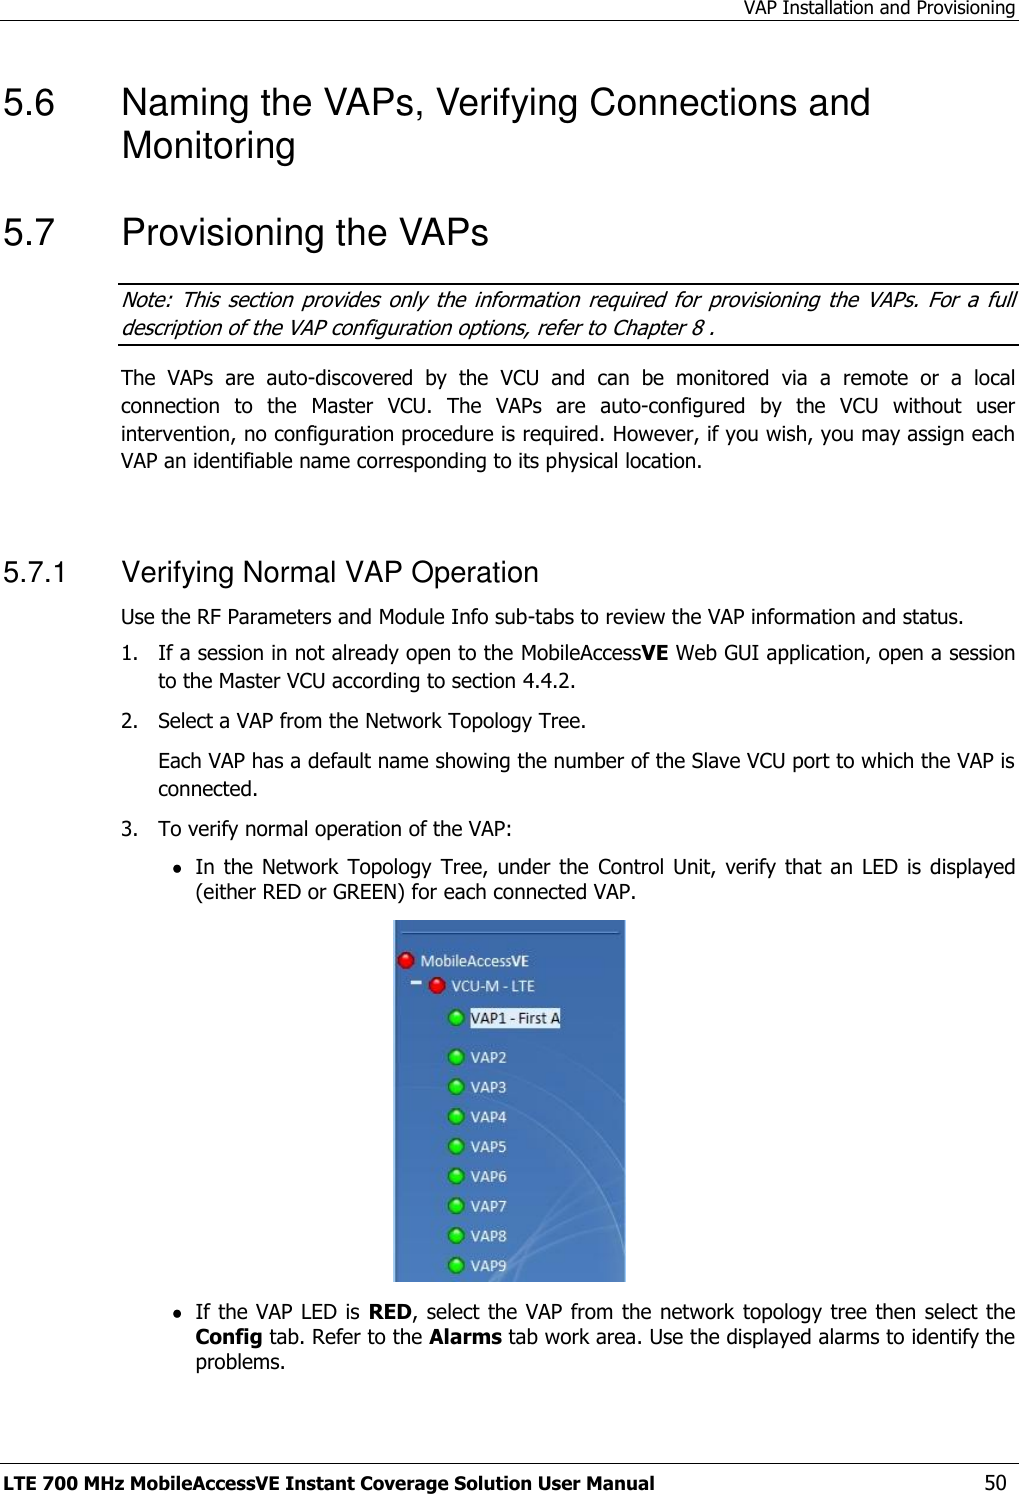 VAP Installation and Provisioning LTE 700 MHz MobileAccessVE Instant Coverage Solution User Manual  50 5.6  Naming the VAPs, Verifying Connections and Monitoring 5.7  Provisioning the VAPs Note:  This  section  provides  only  the  information  required  for  provisioning  the  VAPs.  For  a  full description of the VAP configuration options, refer to Chapter 8 . The  VAPs  are  auto-discovered  by  the  VCU  and  can  be  monitored  via  a  remote  or  a  local connection  to  the  Master  VCU.  The  VAPs  are  auto-configured  by  the  VCU  without  user intervention, no configuration procedure is required. However, if you wish, you may assign each VAP an identifiable name corresponding to its physical location.  5.7.1  Verifying Normal VAP Operation Use the RF Parameters and Module Info sub-tabs to review the VAP information and status. 1.  If a session in not already open to the MobileAccessVE Web GUI application, open a session to the Master VCU according to section 4.4.2. 2.   Select a VAP from the Network Topology Tree.    Each VAP has a default name showing the number of the Slave VCU port to which the VAP is connected. 3.   To verify normal operation of the VAP:  In the  Network  Topology Tree,  under the  Control Unit,  verify that  an  LED is  displayed (either RED or GREEN) for each connected VAP.    If the VAP LED is  RED, select the VAP from the network  topology tree then select the Config tab. Refer to the Alarms tab work area. Use the displayed alarms to identify the problems.  